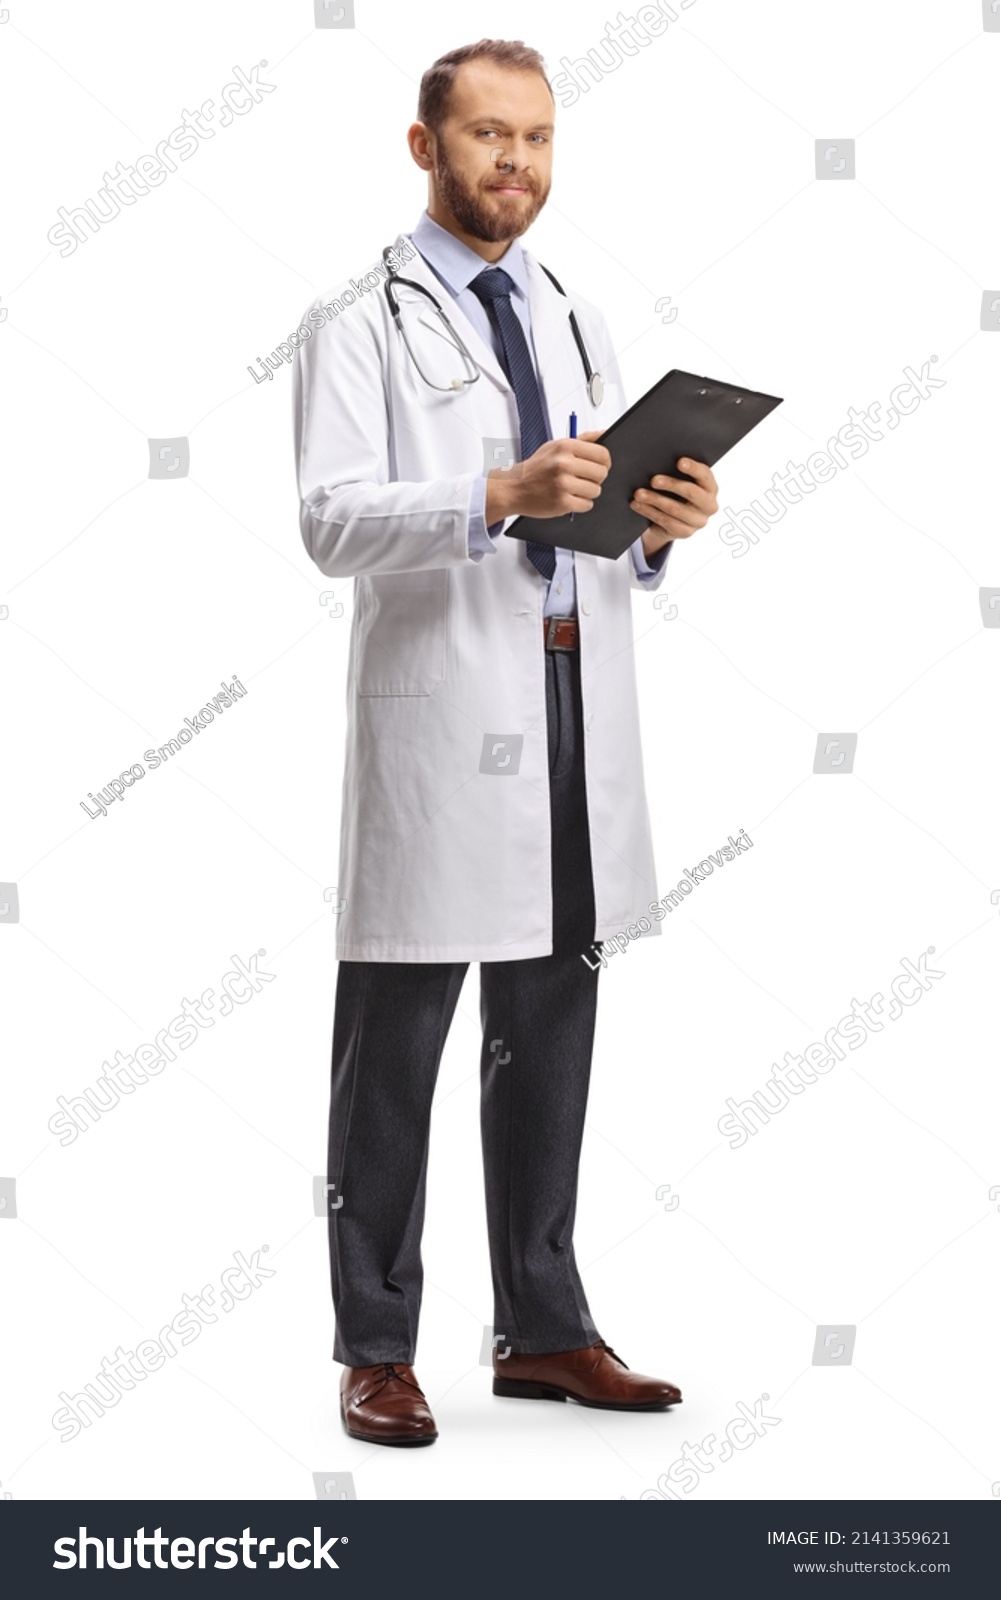 Young male doctor holding a clipboard and looking at camera isolated on white background #2141359621